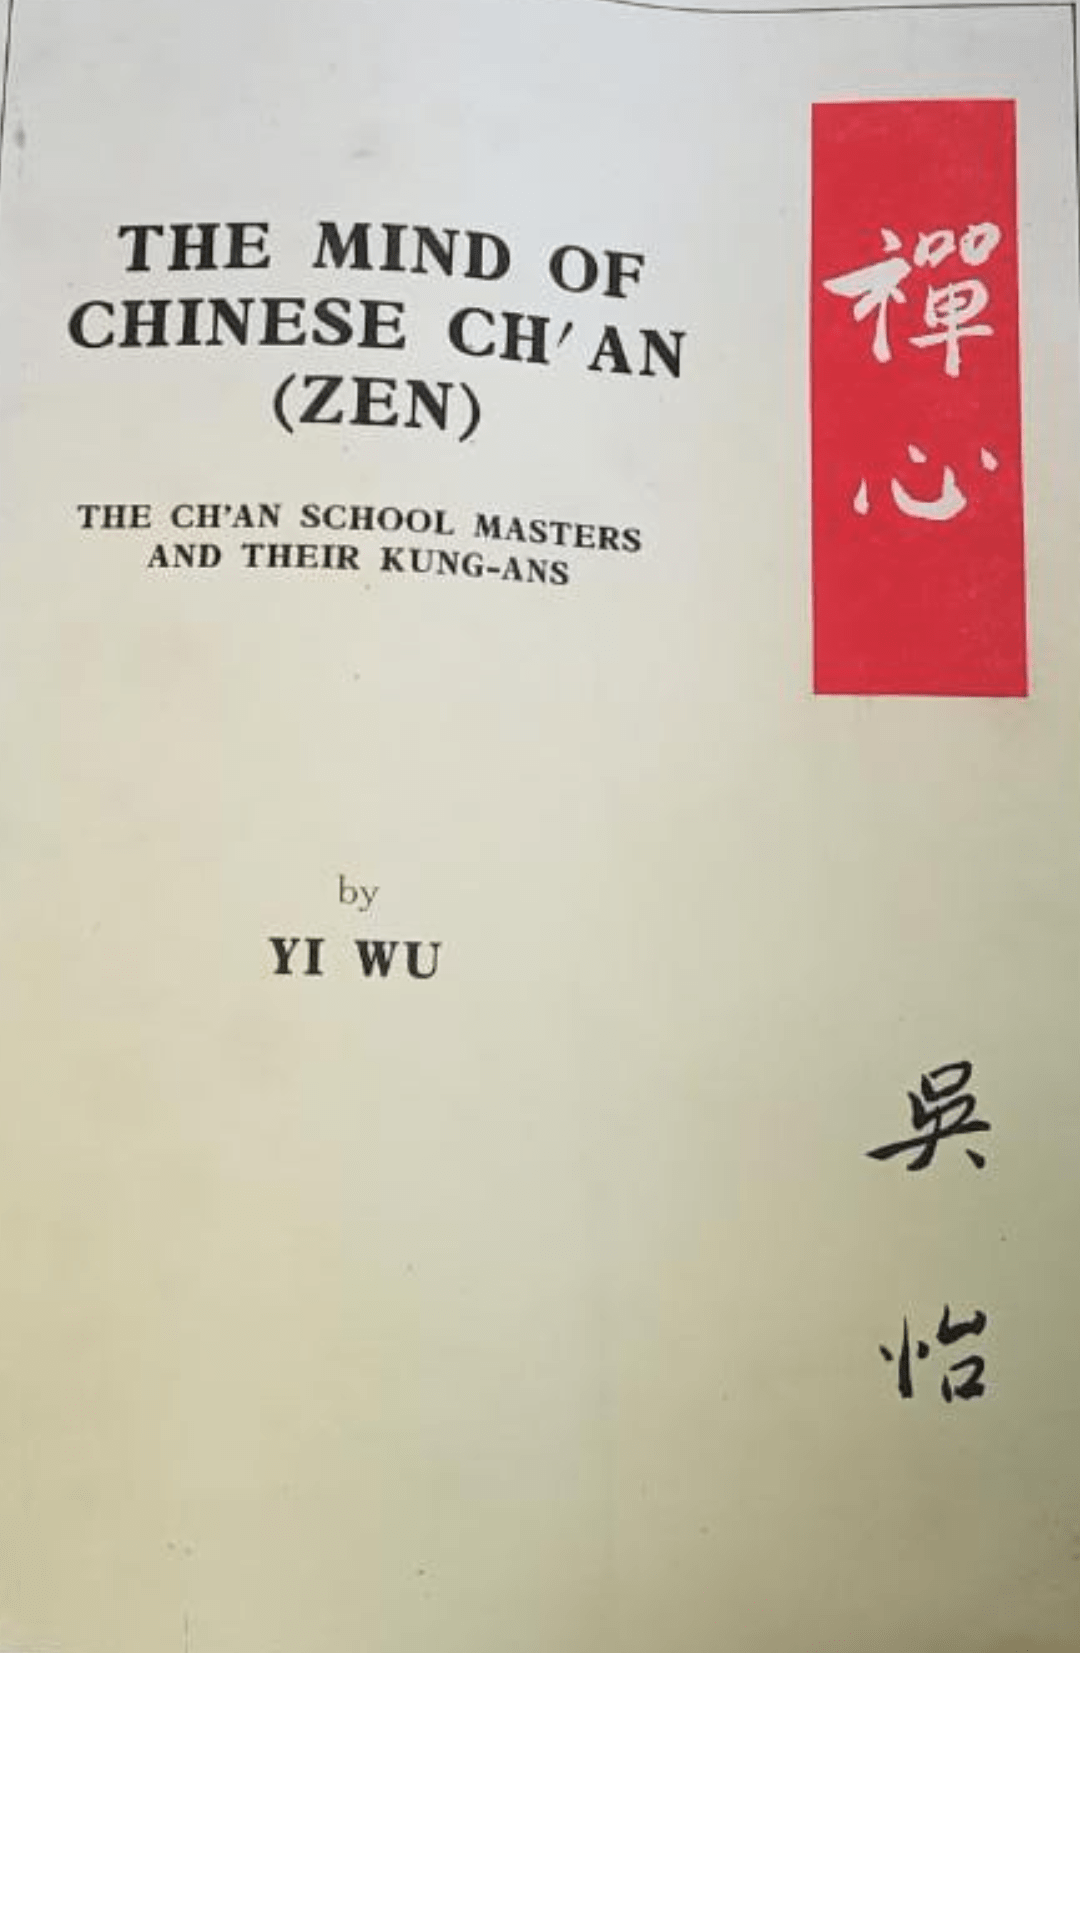 The Mind of Chinese Ch'an (Zen)